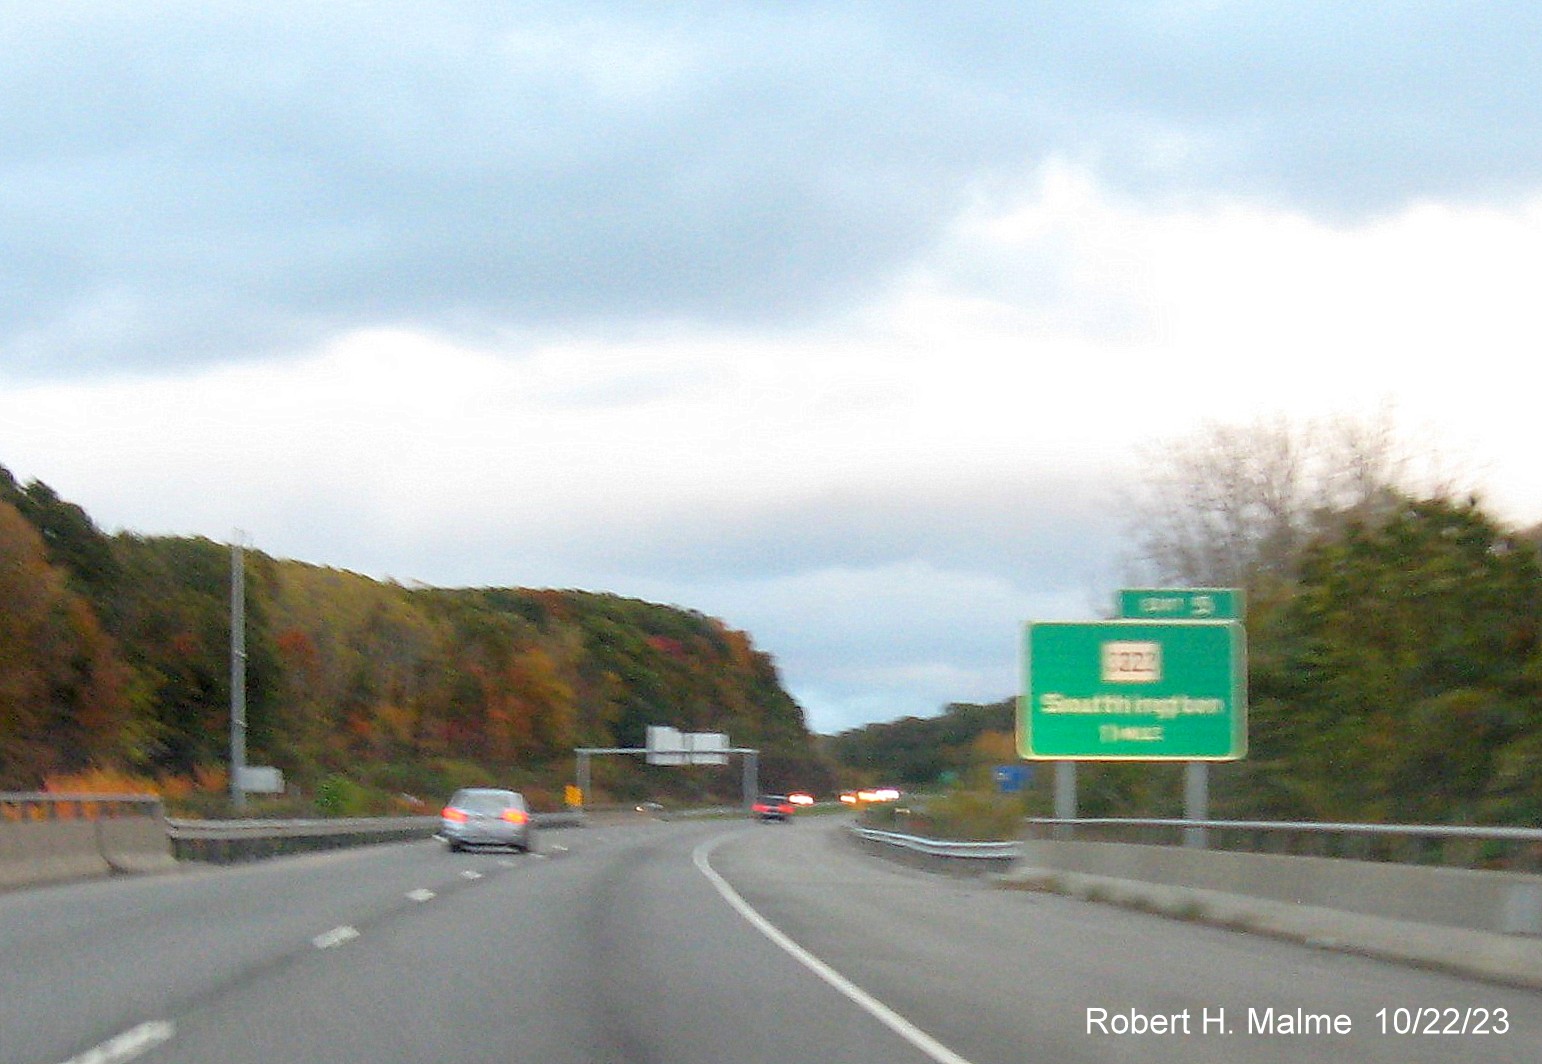 Image of new 1 mile advance sign for CT 322 exit with new milepost exit number on I-691 East in Southington, October 2023